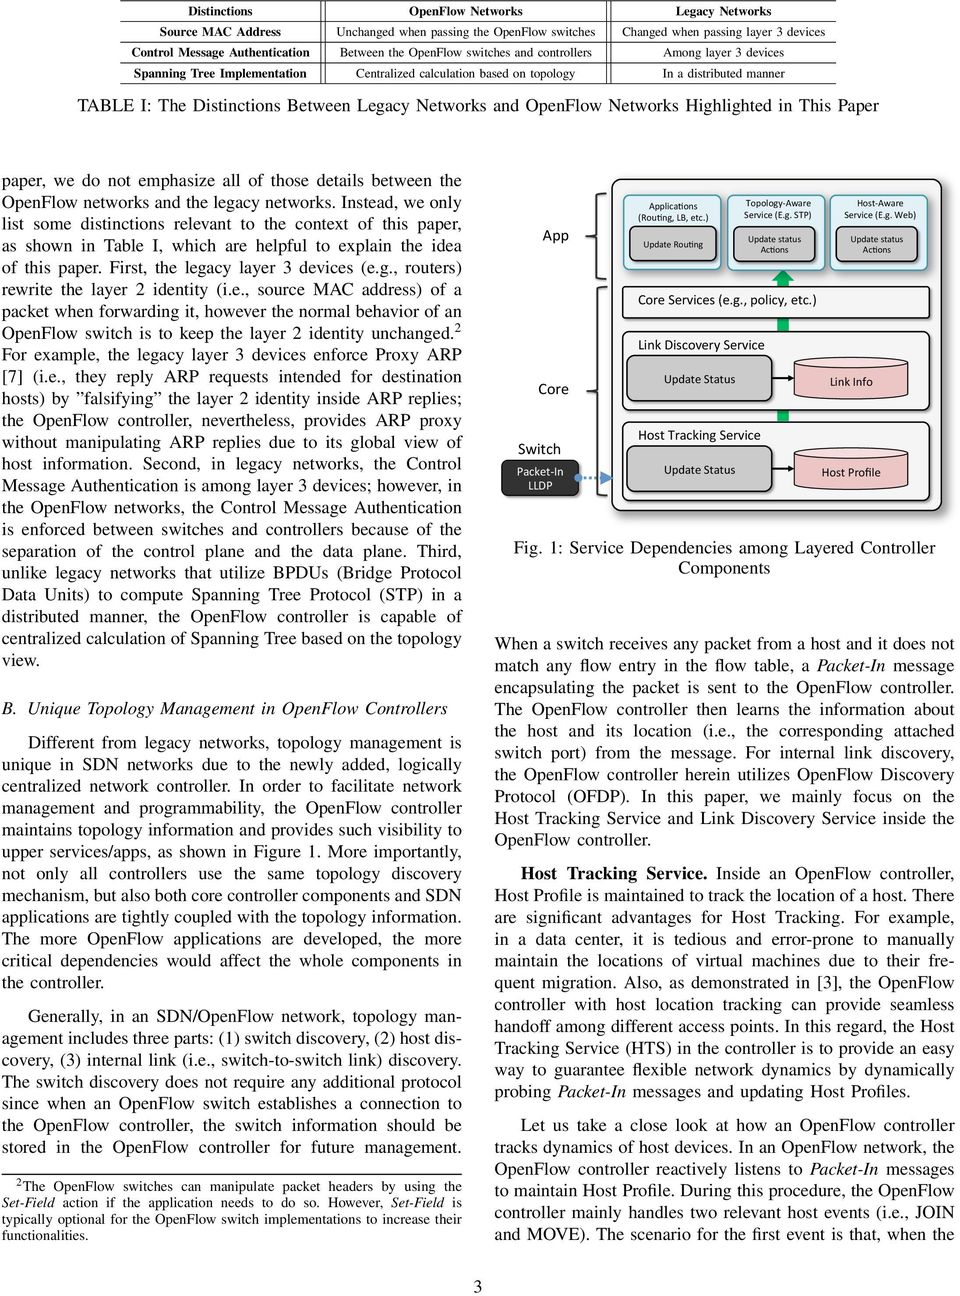 OpenFlow Networks Highlighted in This Paper paper, we do not emphasize all of those details between the OpenFlow networks and the legacy networks.